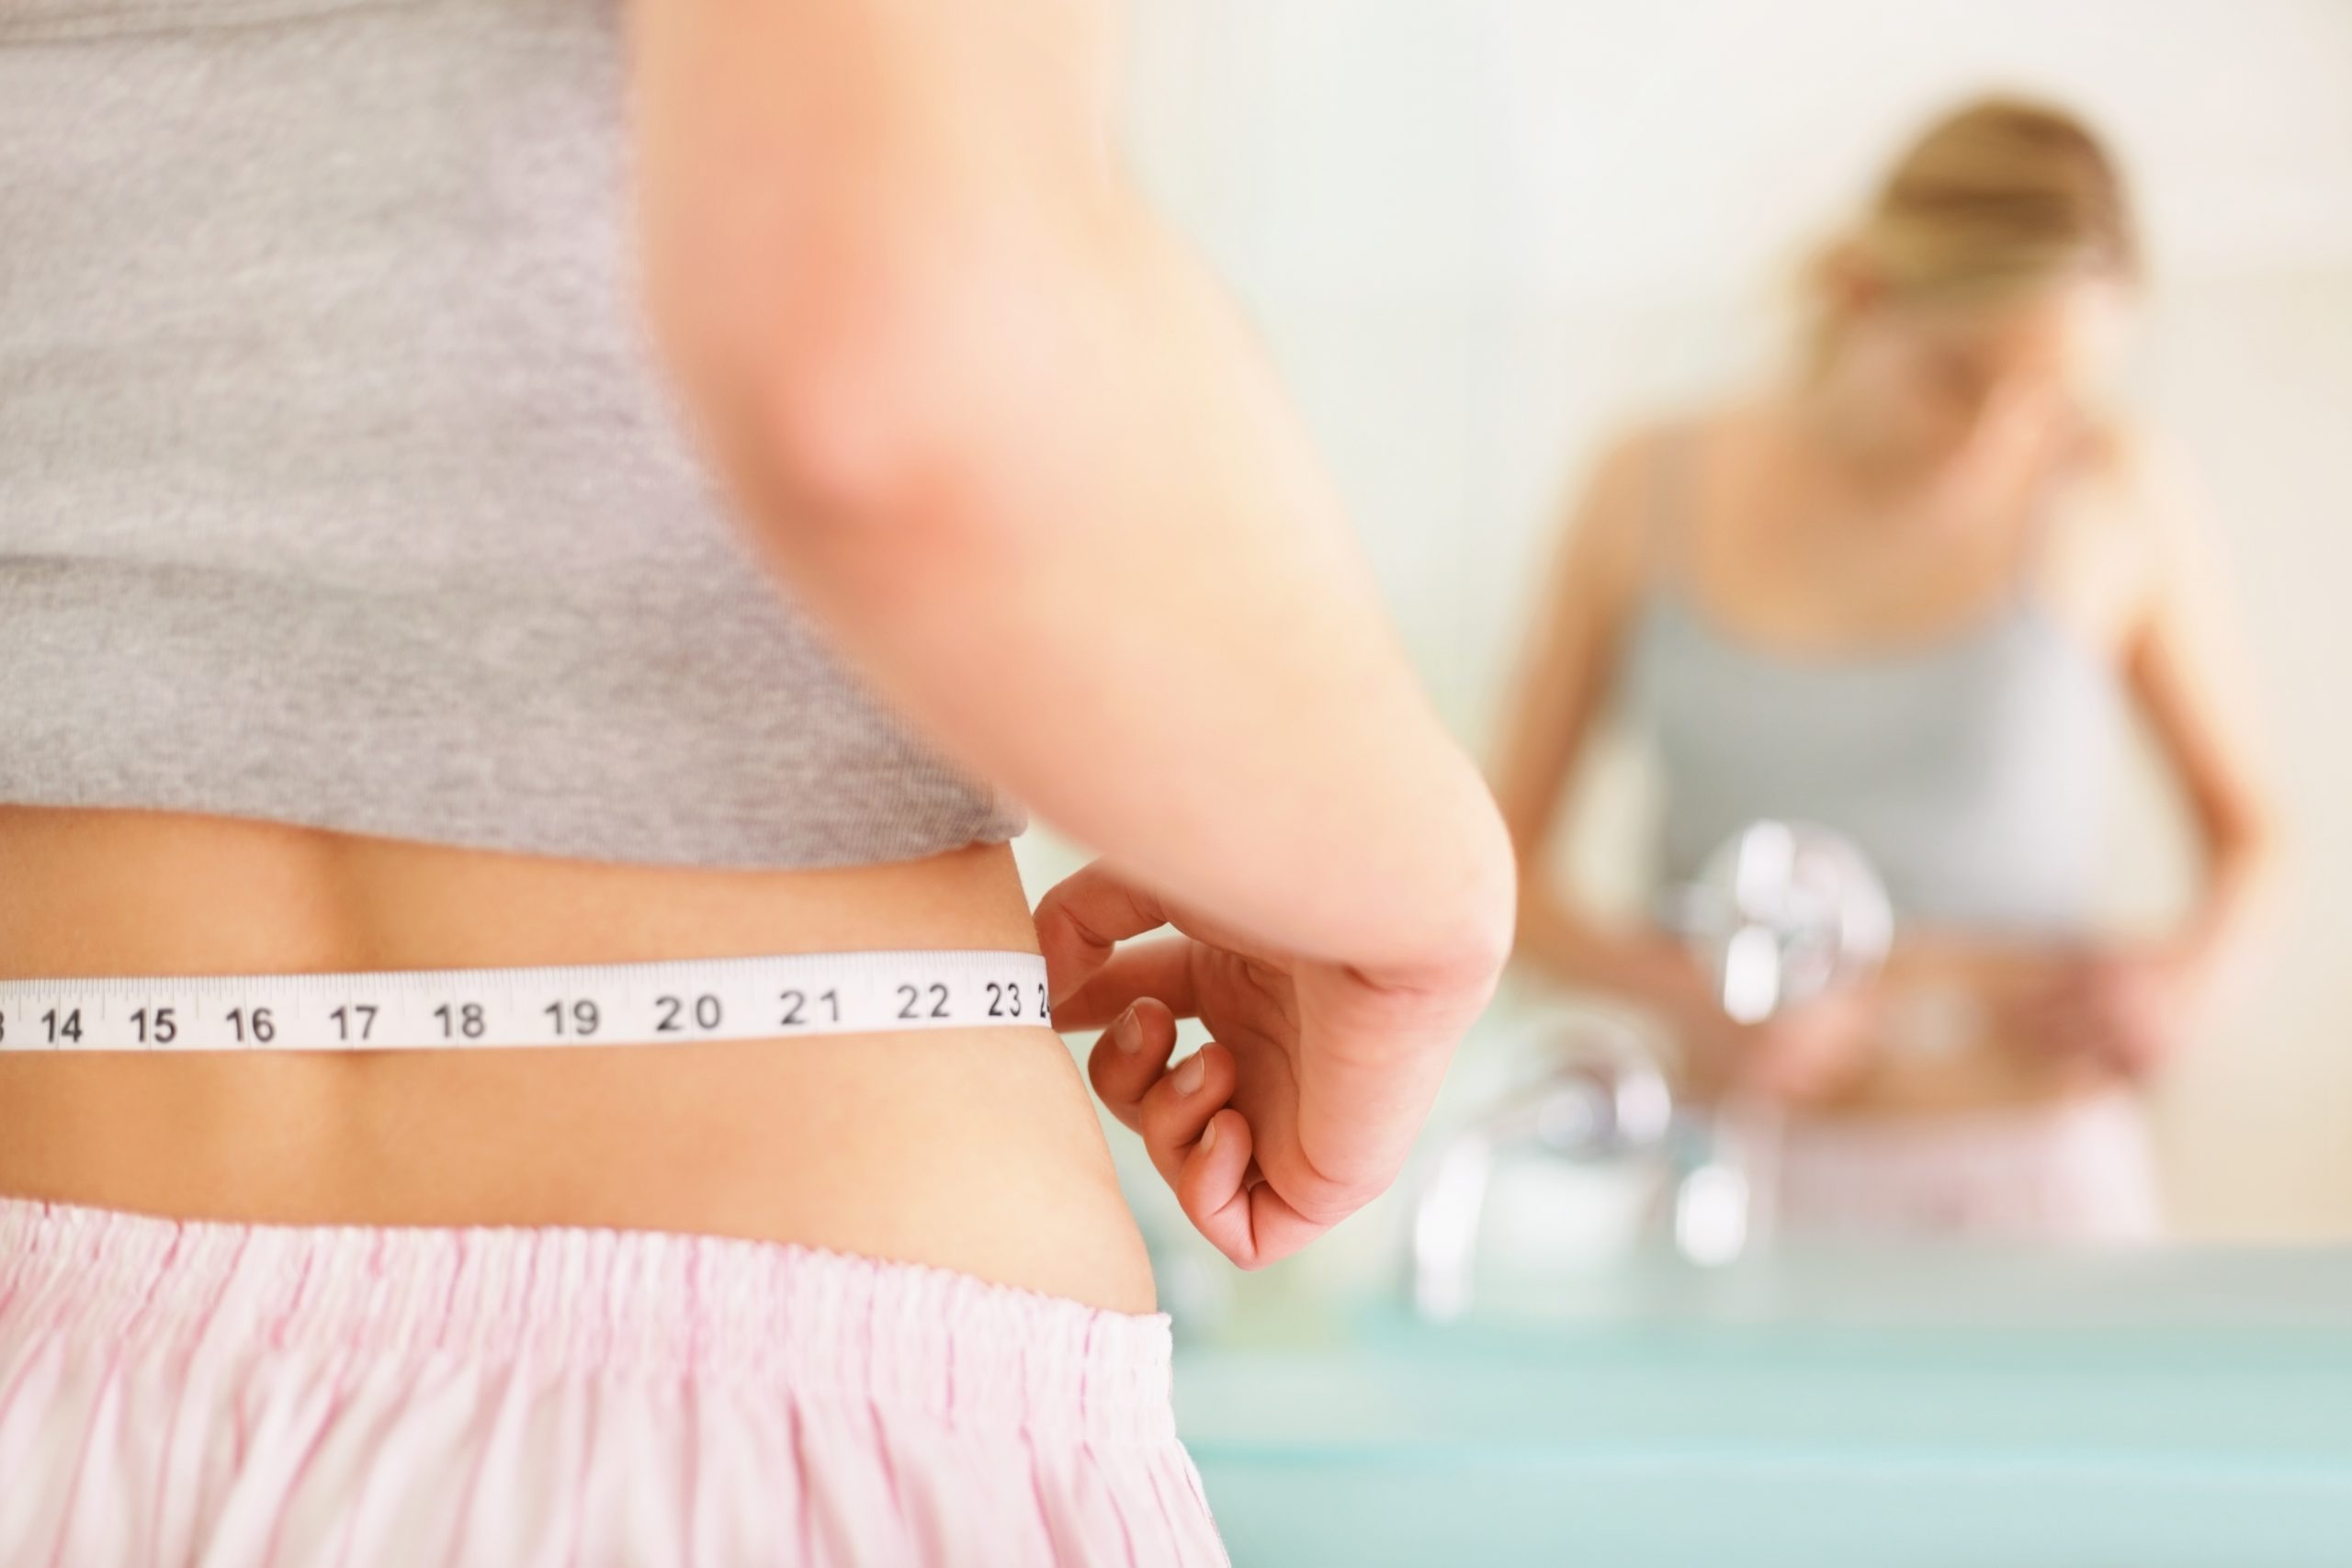 Waist Measurement – An important indicator of health